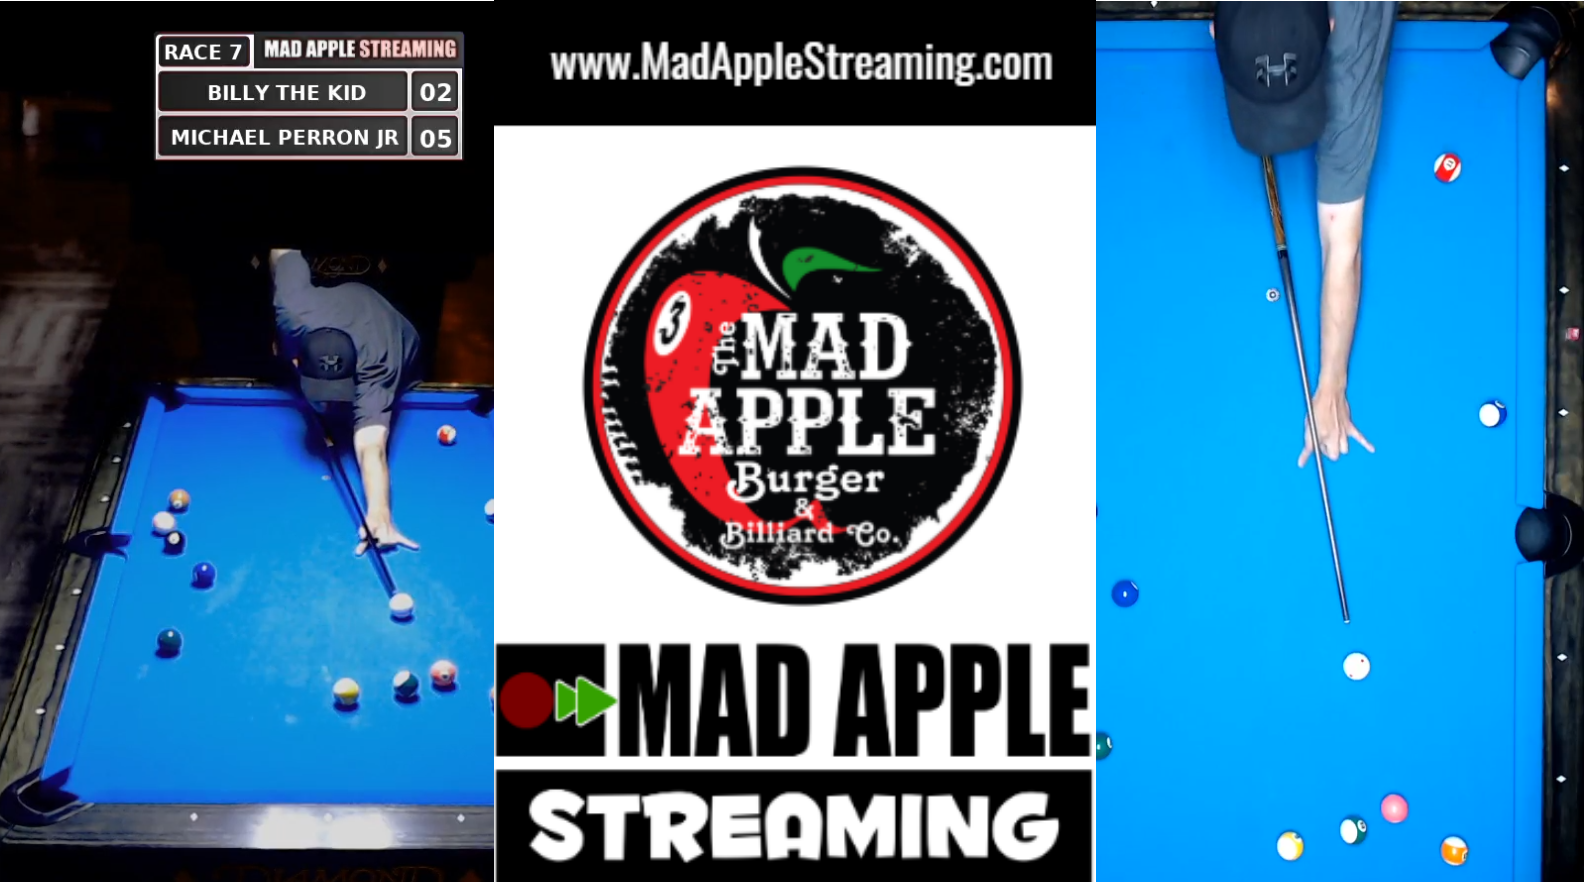 Mad Apple Streaming